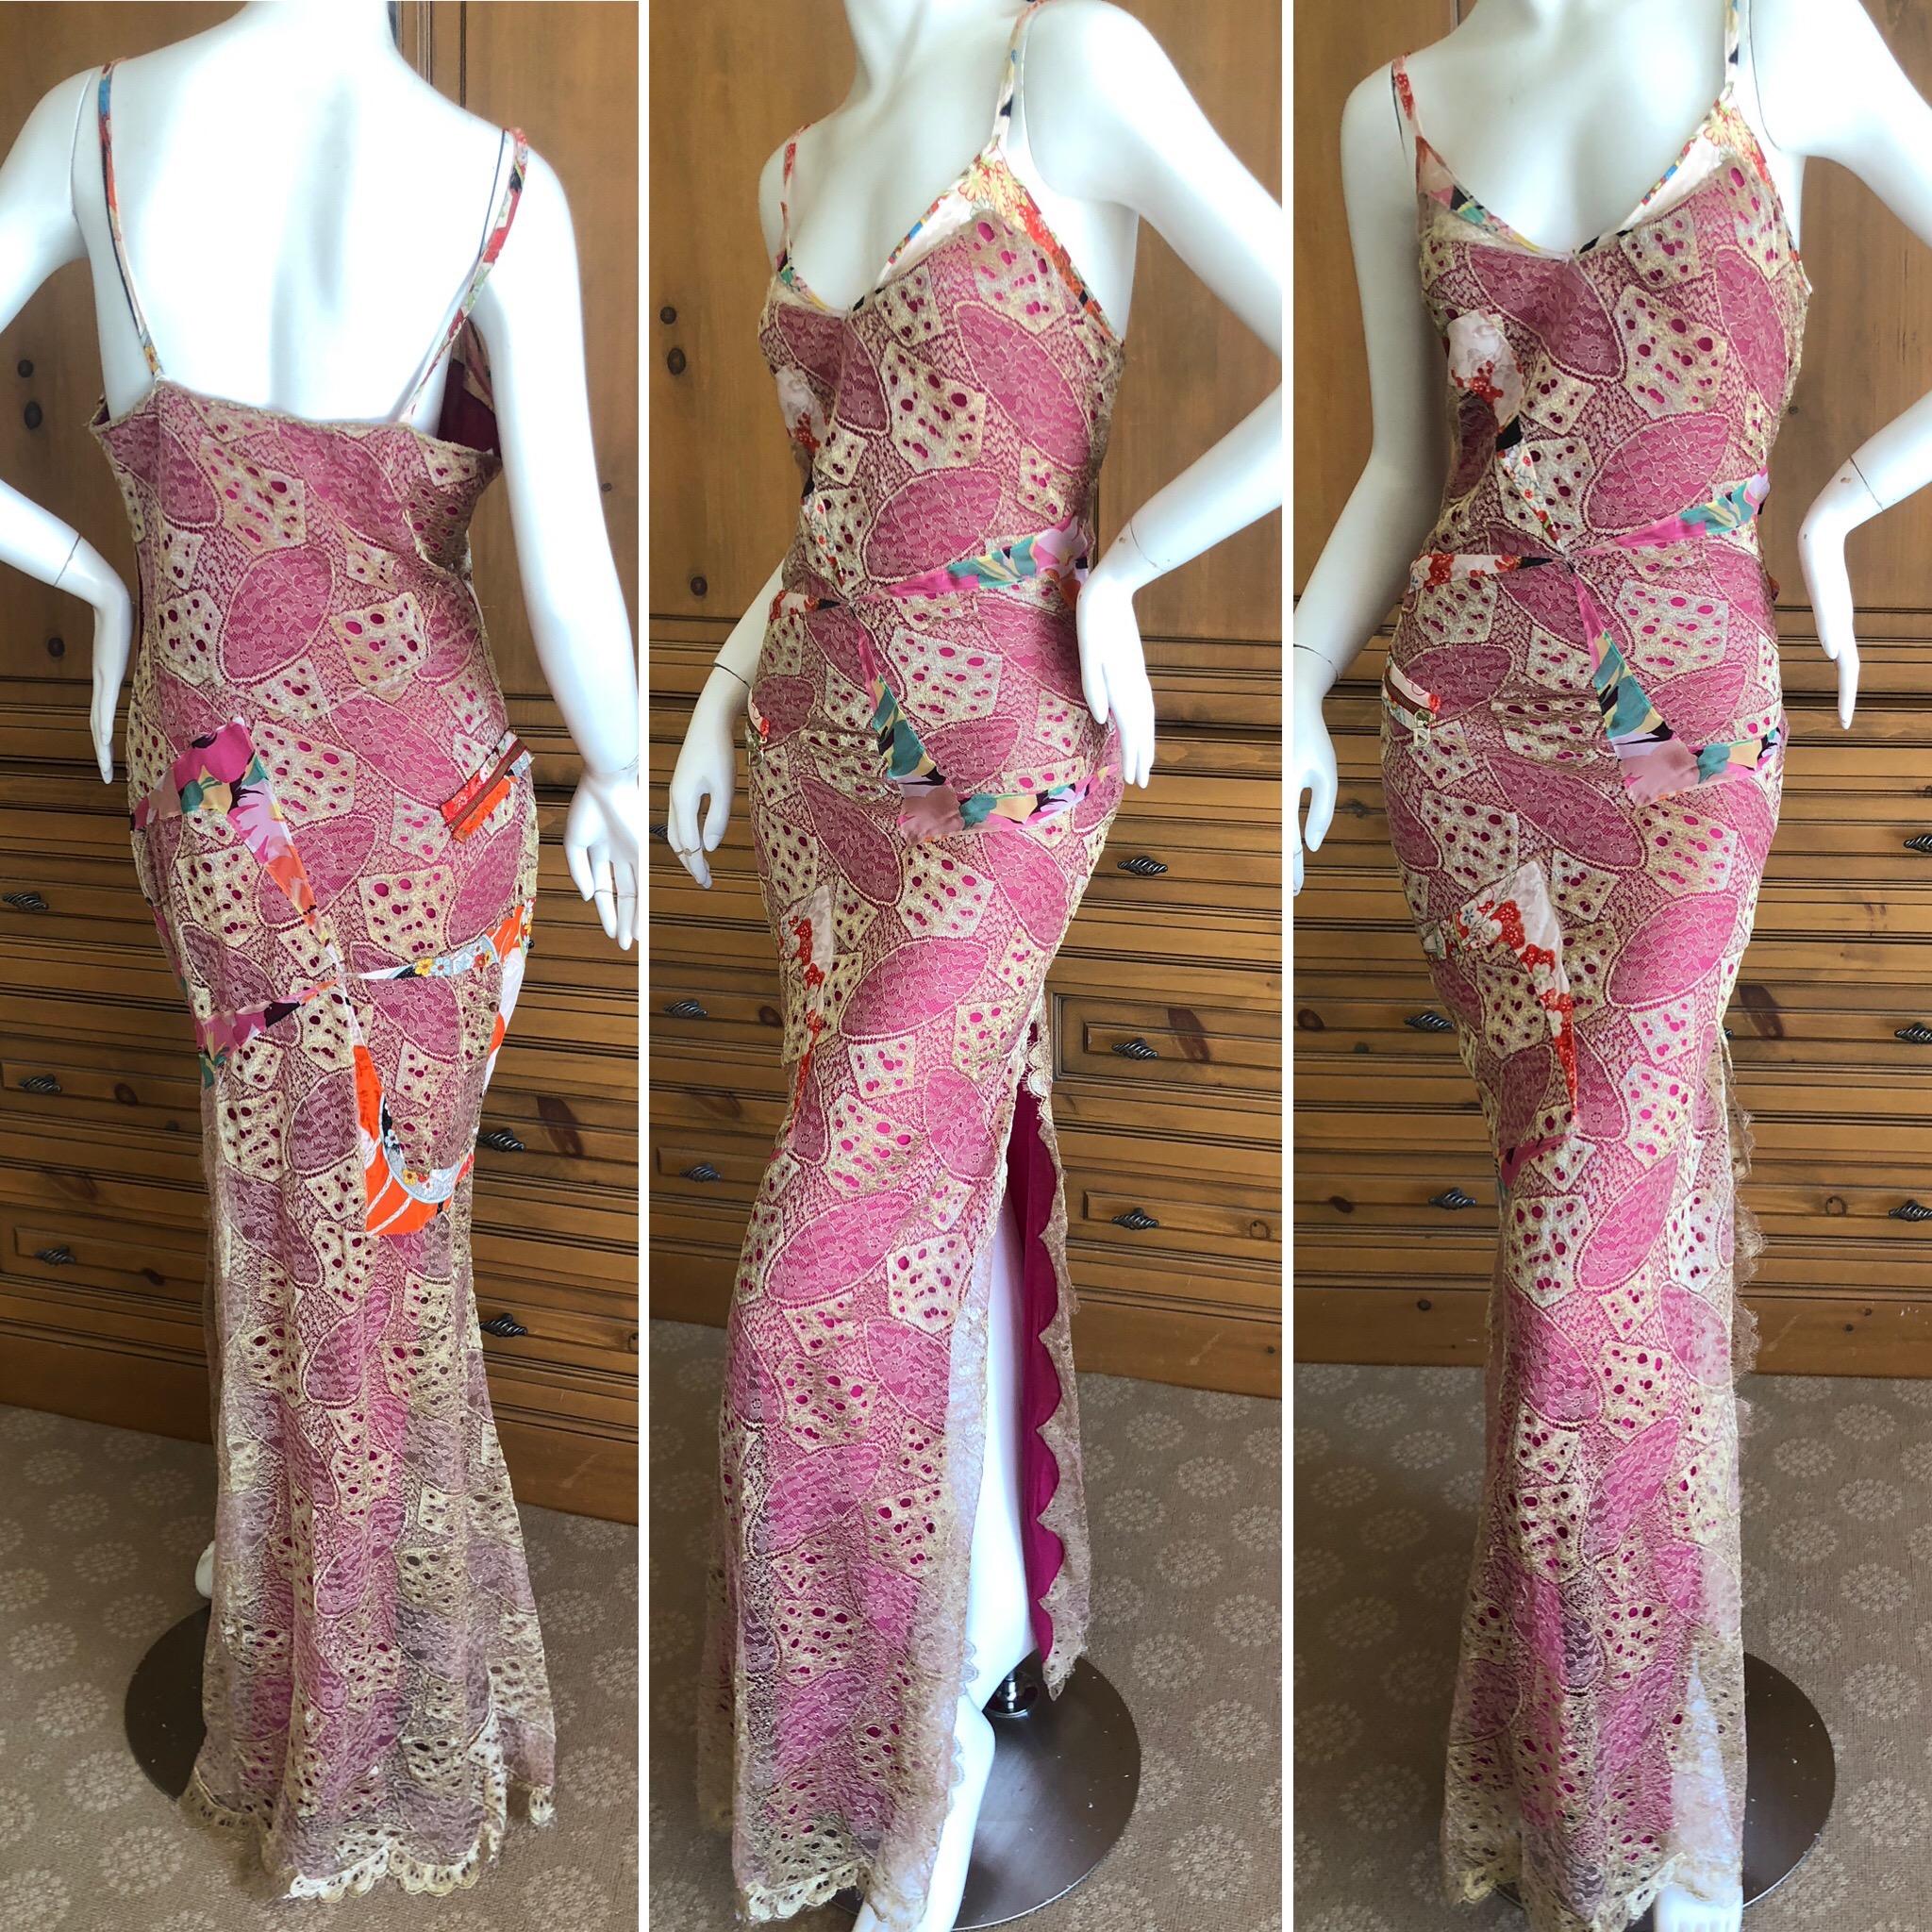 Christian Dior by John Galliano Gold Lace Overlay Evening Dress Scalloped Edges
So pretty ,there is a high slit, edged in gold lace scallops.
Please use the zoom feature to see the details, it is amazing.
Size 42
 Bust 40